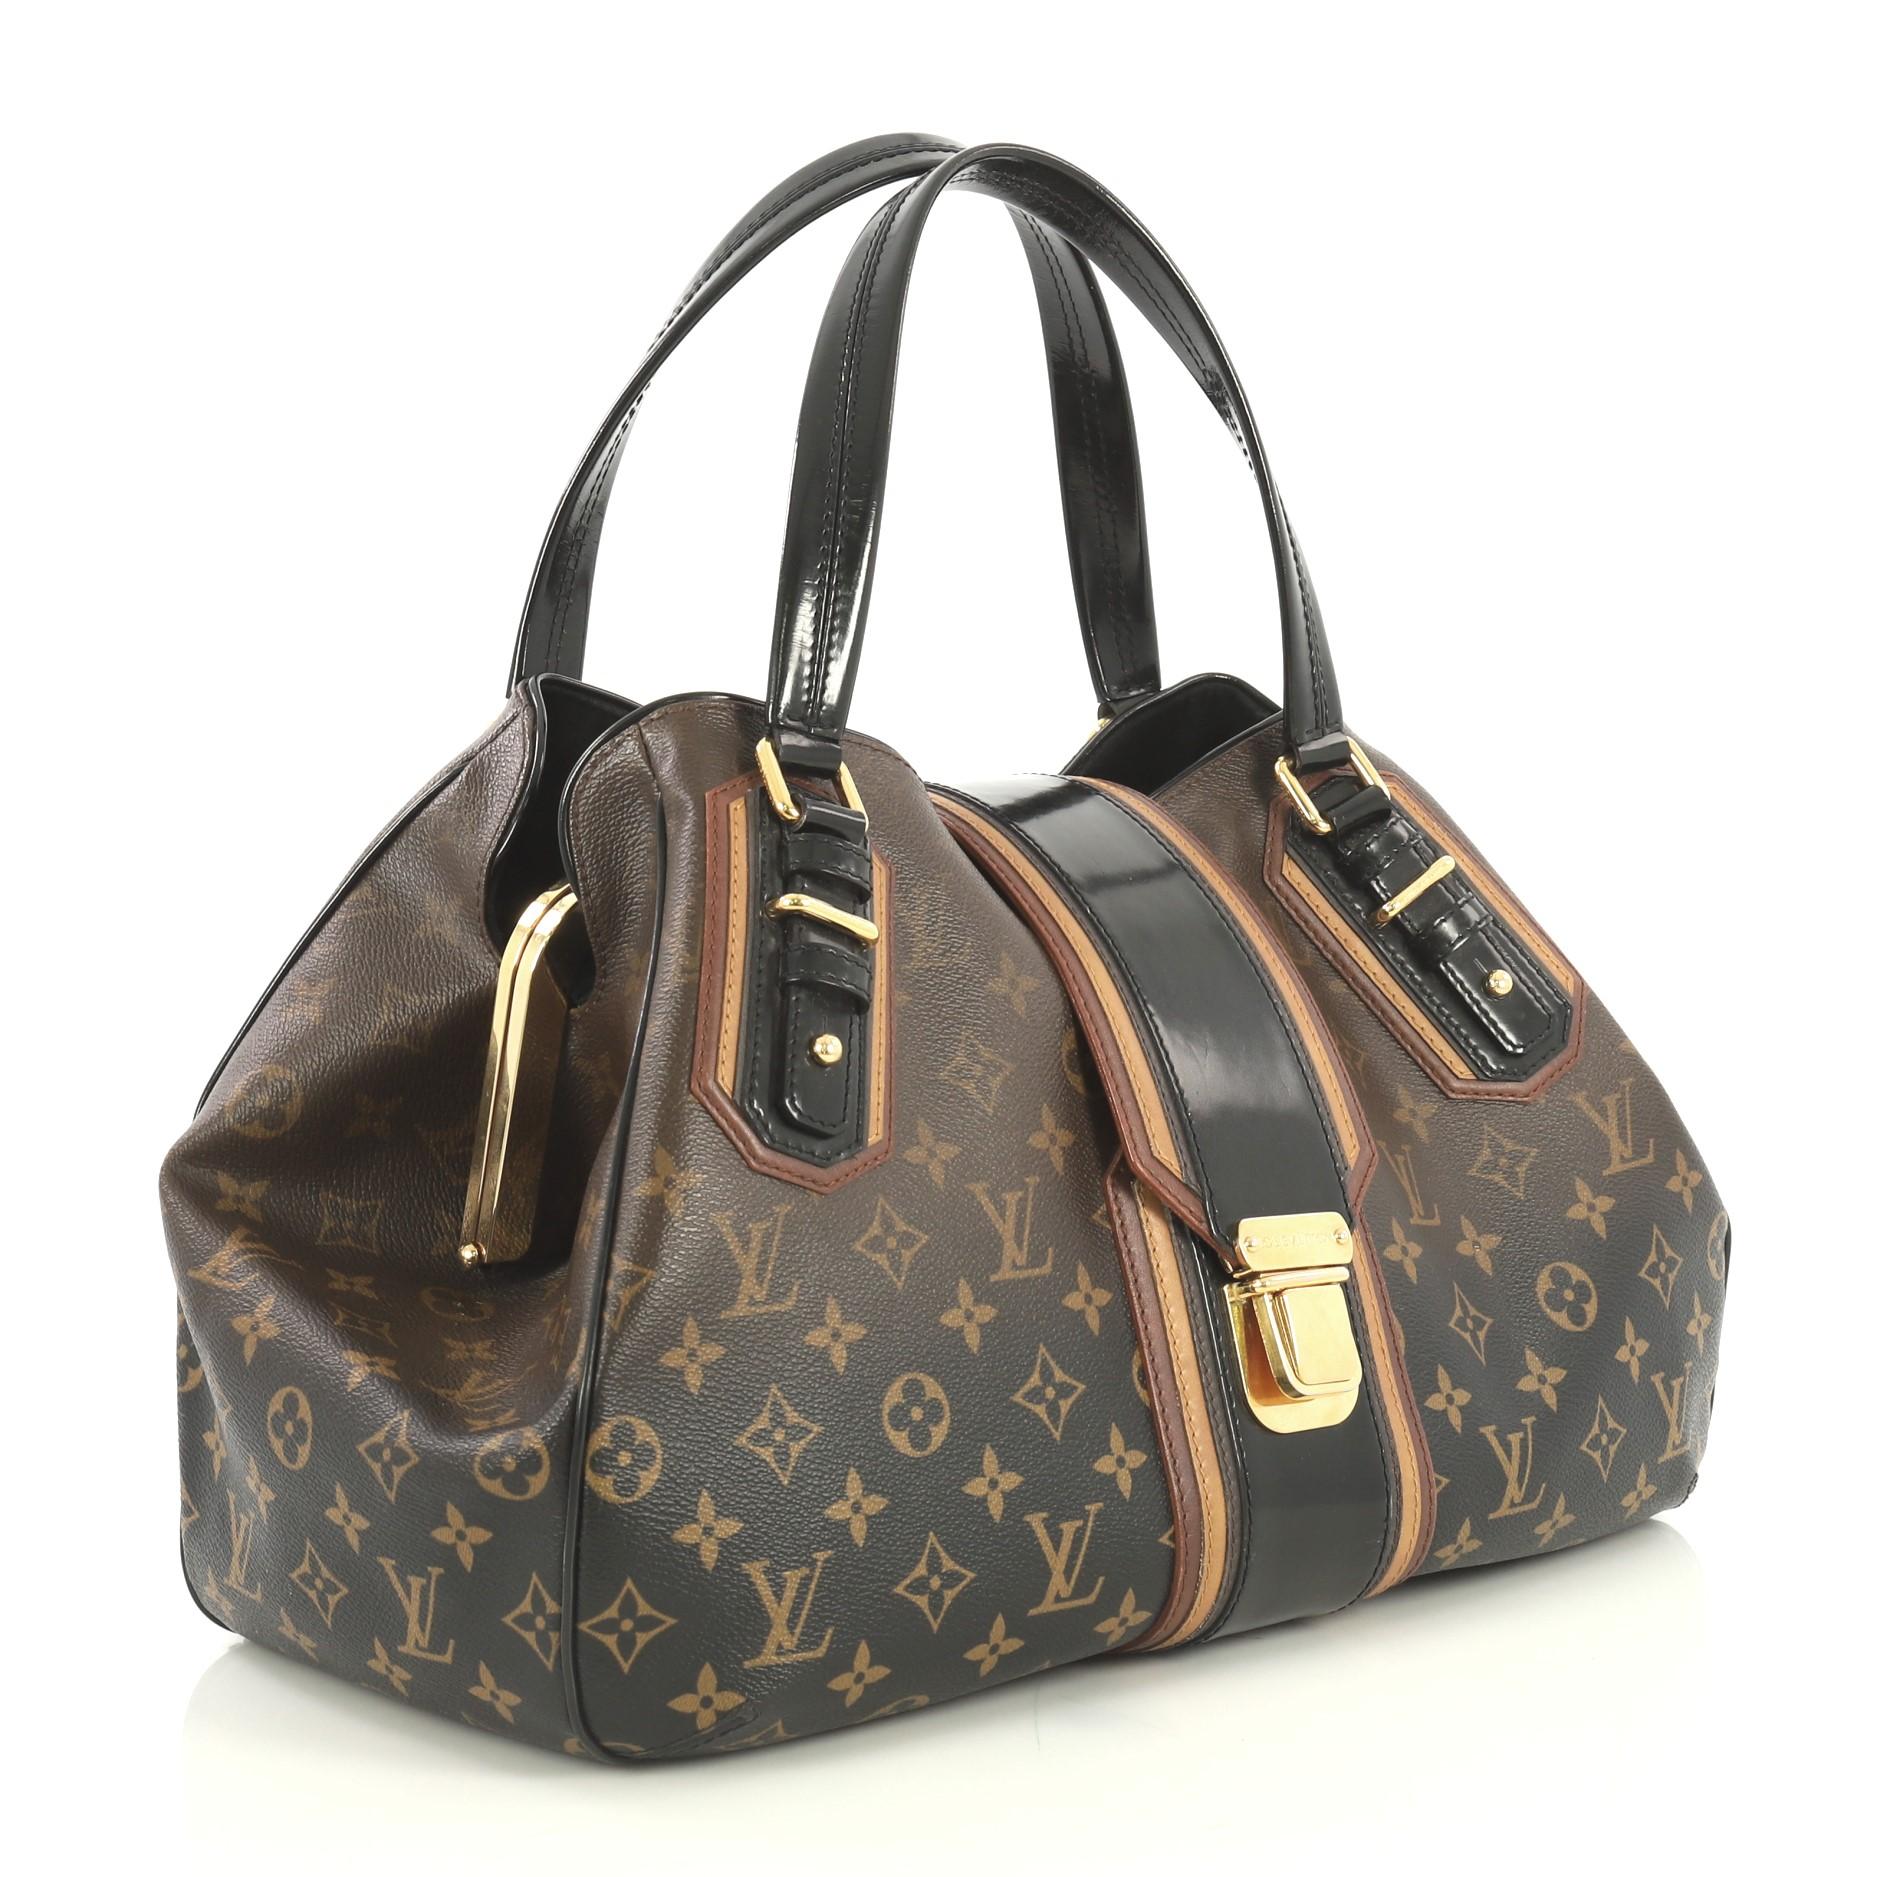 This Louis Vuitton Griet Handbag Limited Edition Monogram Mirage, crafted from brown monogram coated canvas, features black patent leather handles and trim, hidden golden frame, and gold-tone hardware. Its flap tab with push-lock closure opens to a